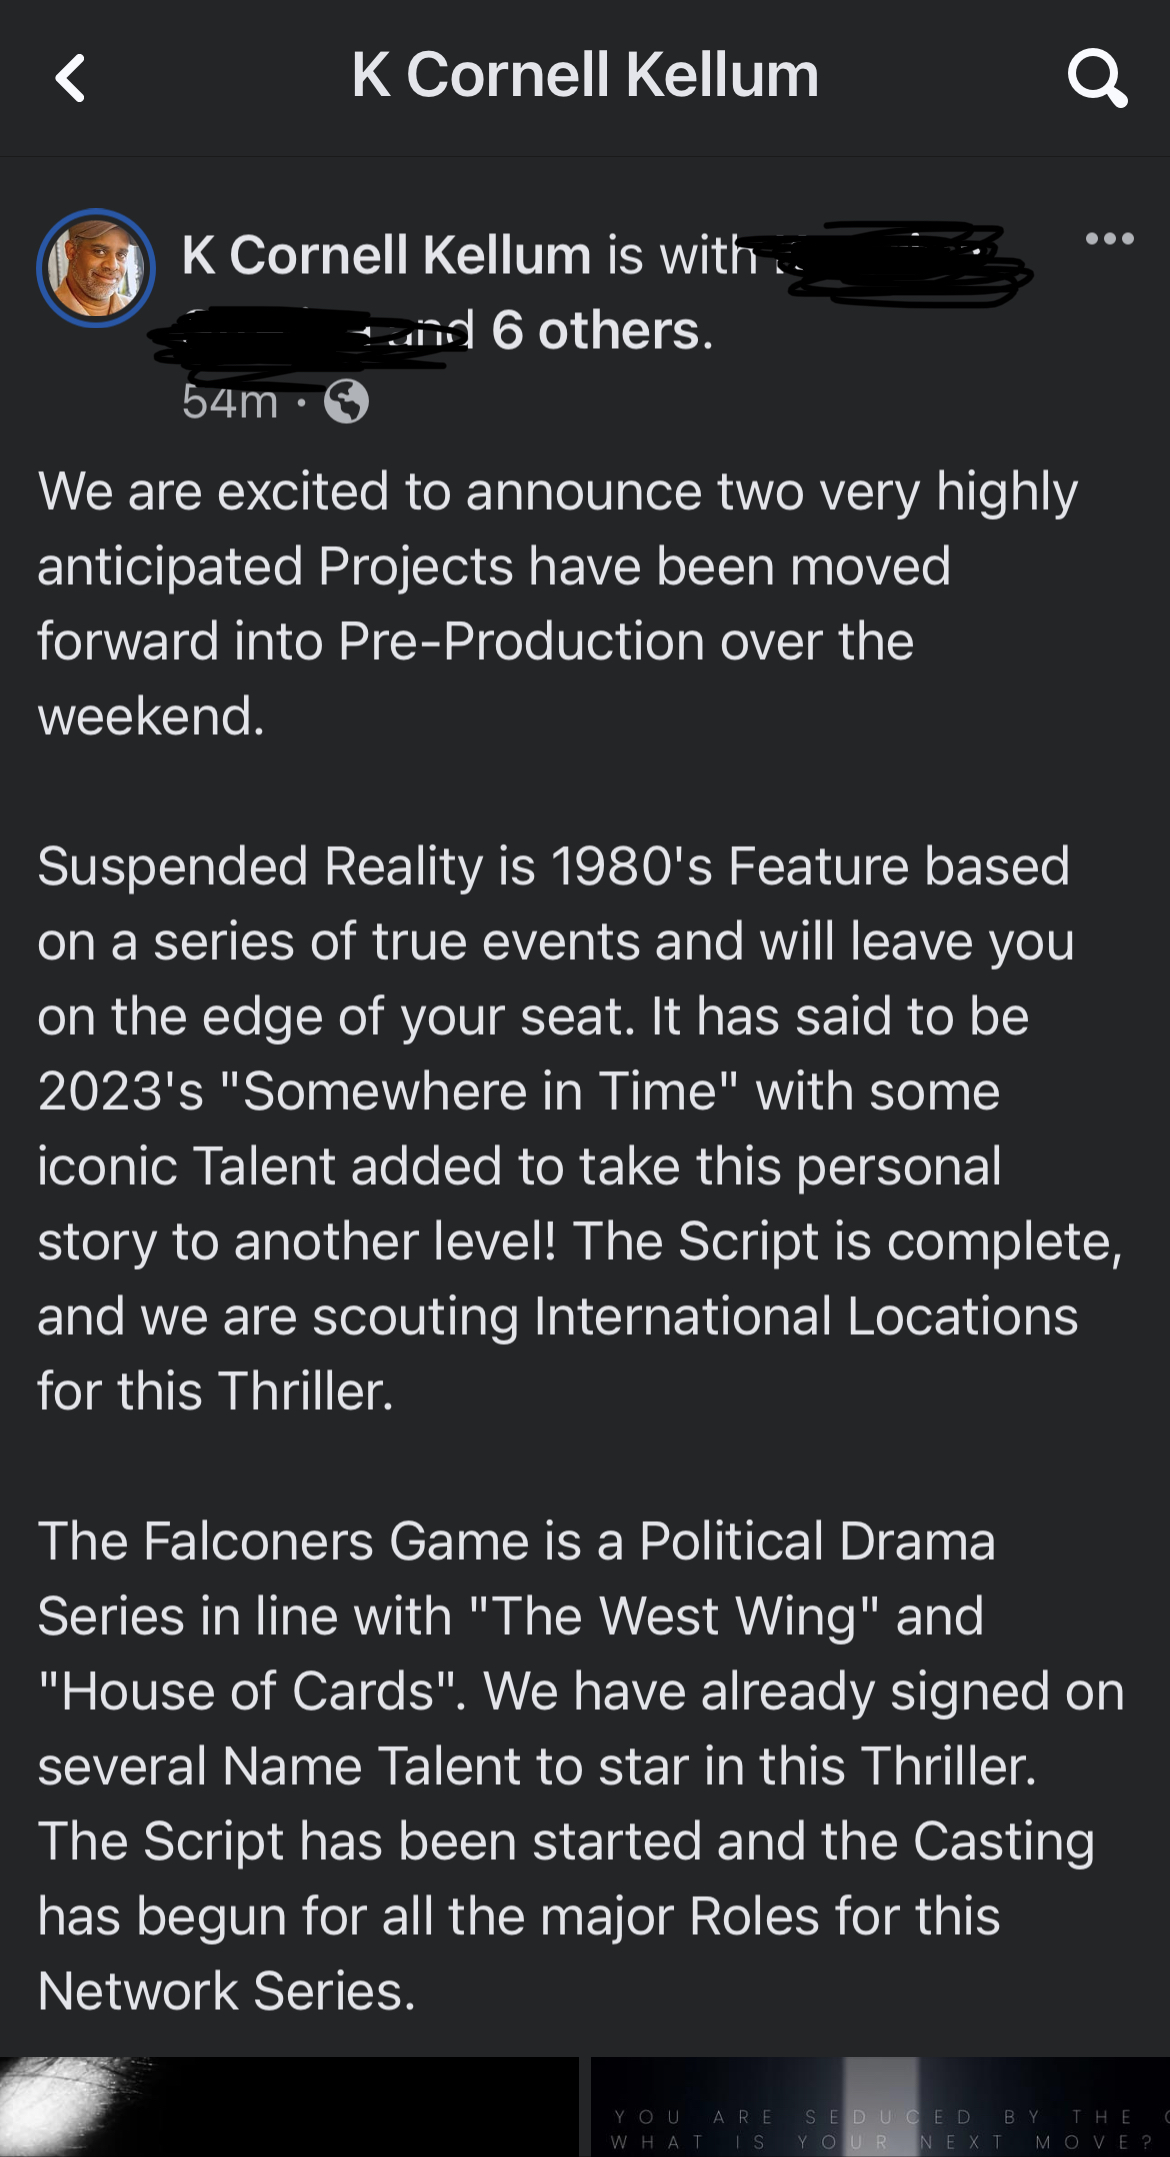 More projects moving into “pre-production”